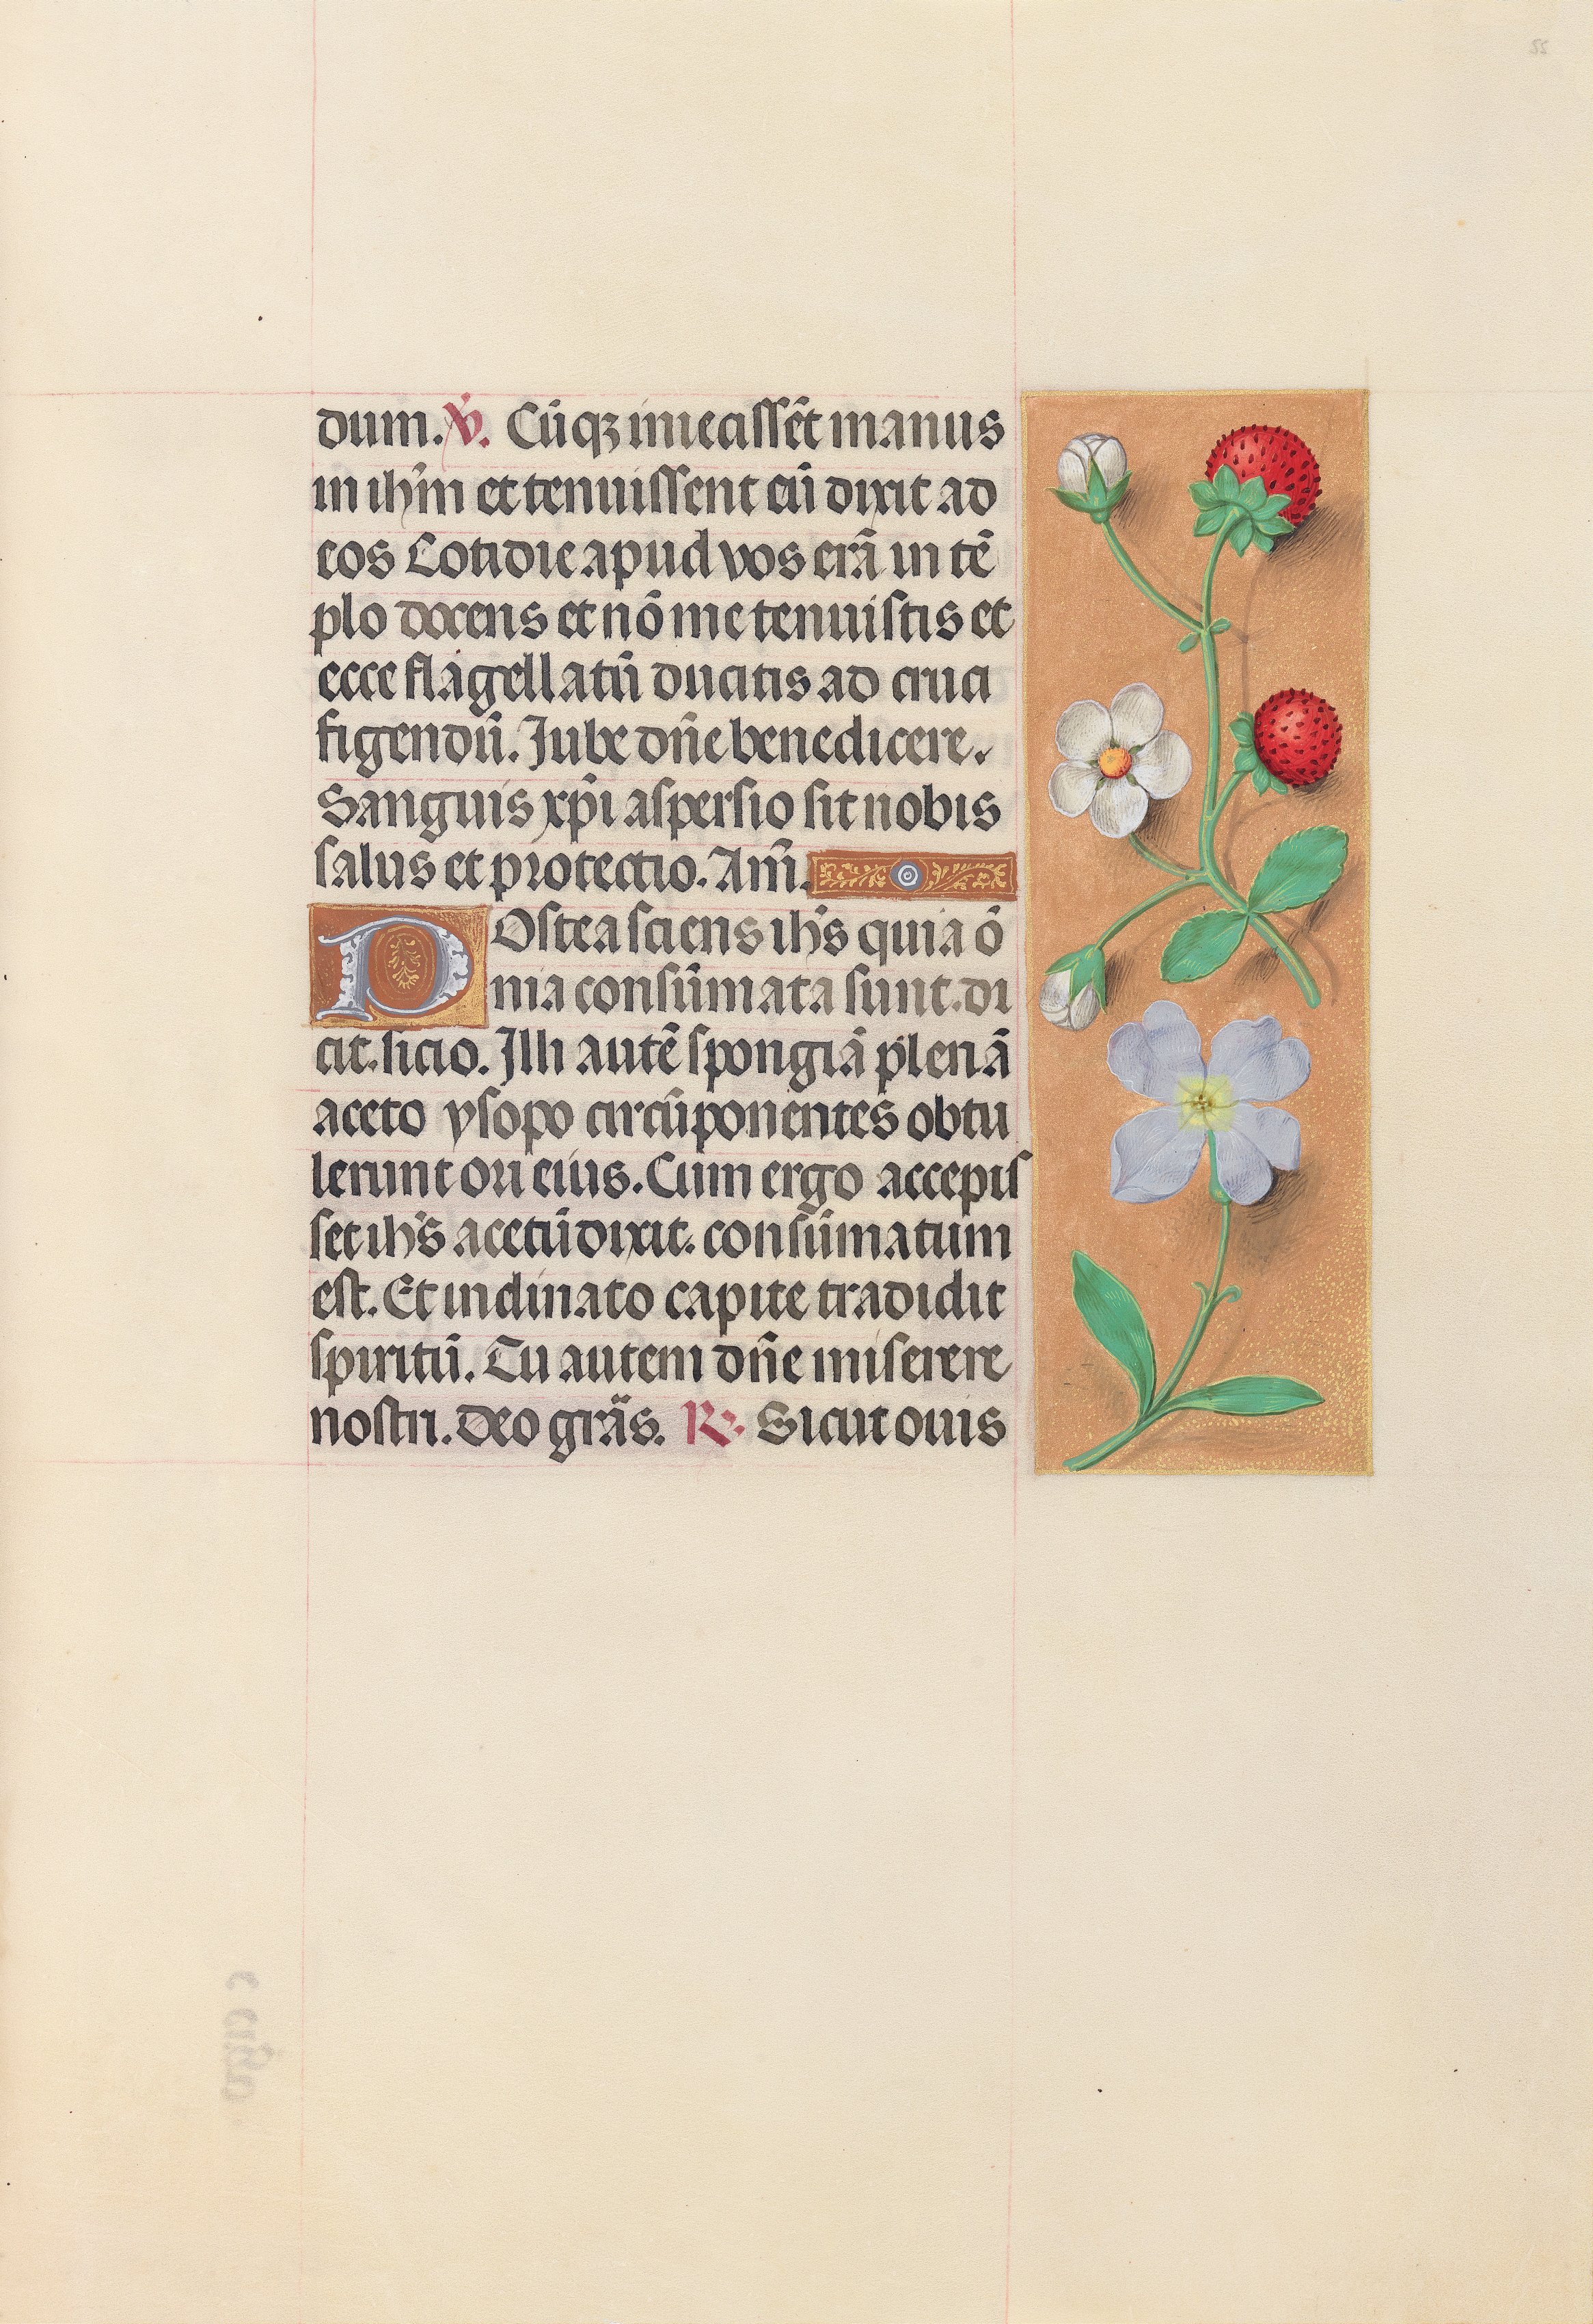 Hours of Queen Isabella the Catholic, Queen of Spain:  Fol. 55r